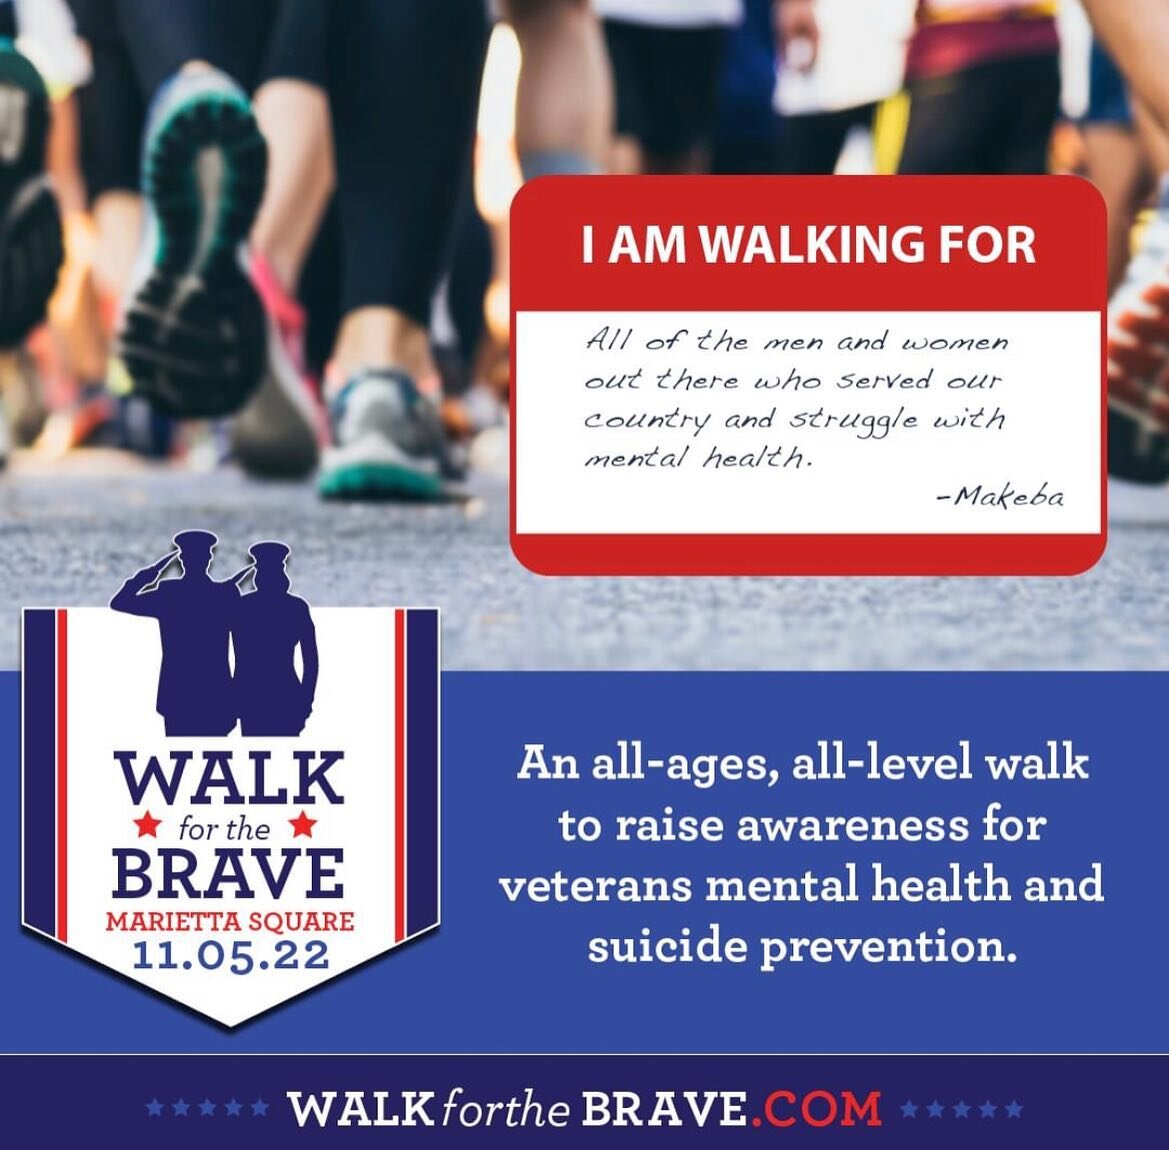 Join us the morning of November 5, 2022 at Glover Park on the Marietta Square for an all ages, all level walk to raise awareness for veterans mental health and suicide prevention. 
WALK for the BRAVE
5 November 2022
Glover Park, Marietta Square
8am-N